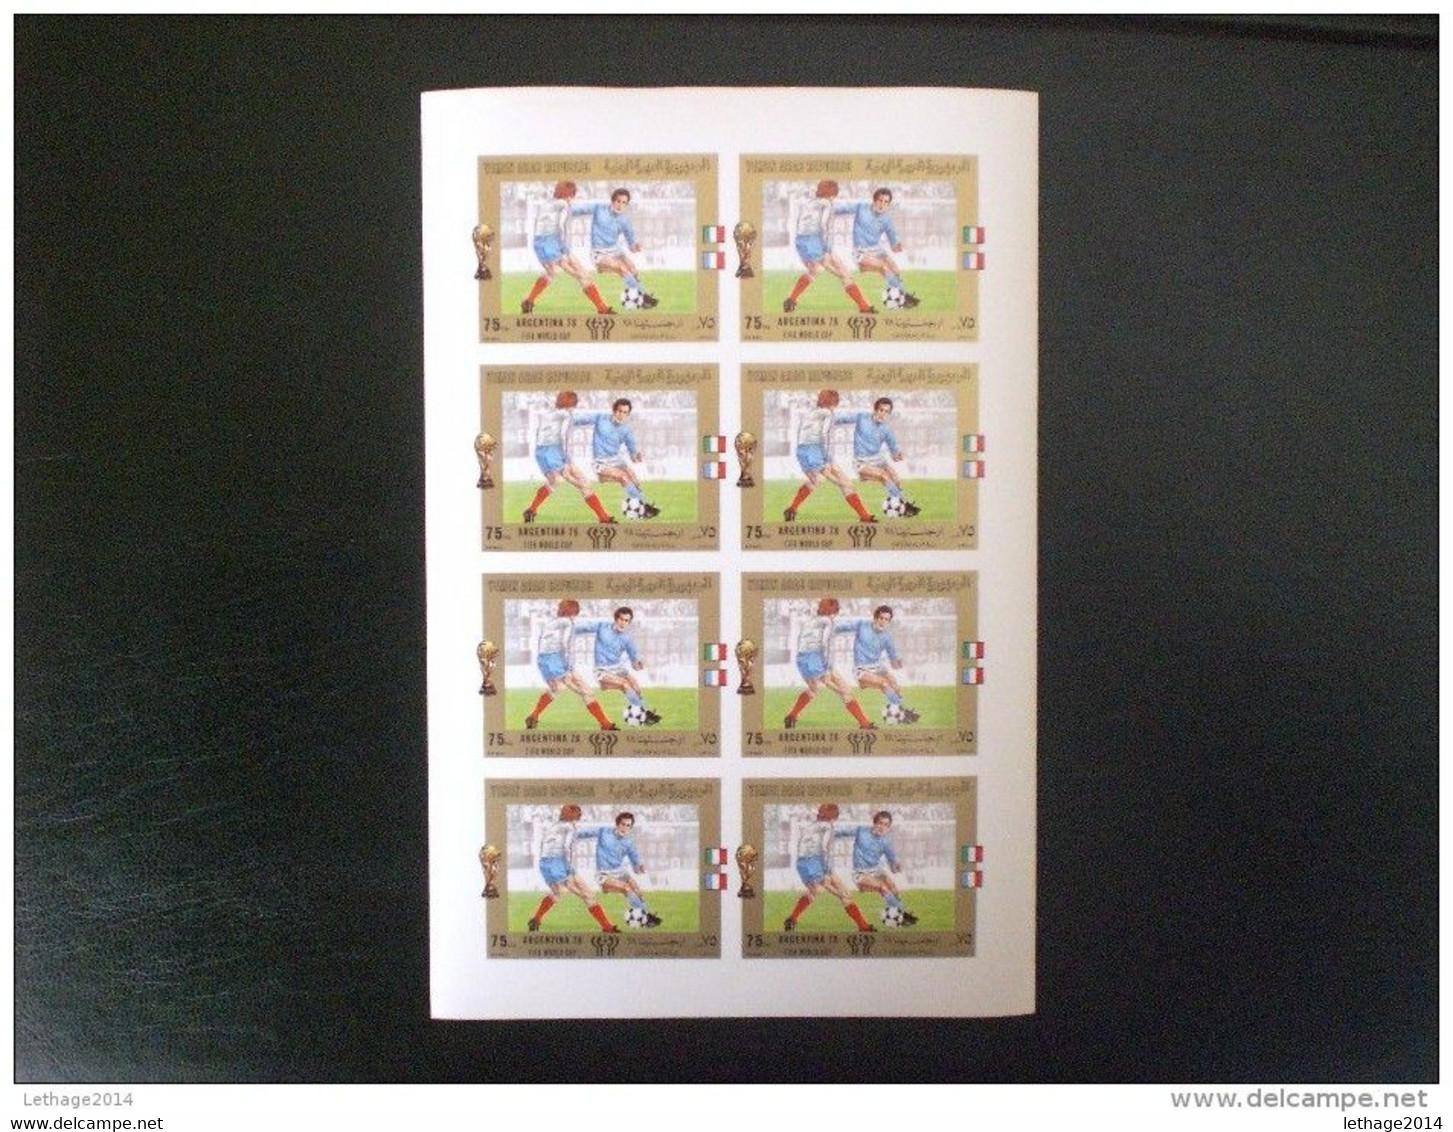 YEMEN 1980 Football World Cup - Argentina 1978 8 sheet x 8 sery complet IMPERF RARE !! MNH 800,00 EURO CATALOGUE MICHEL